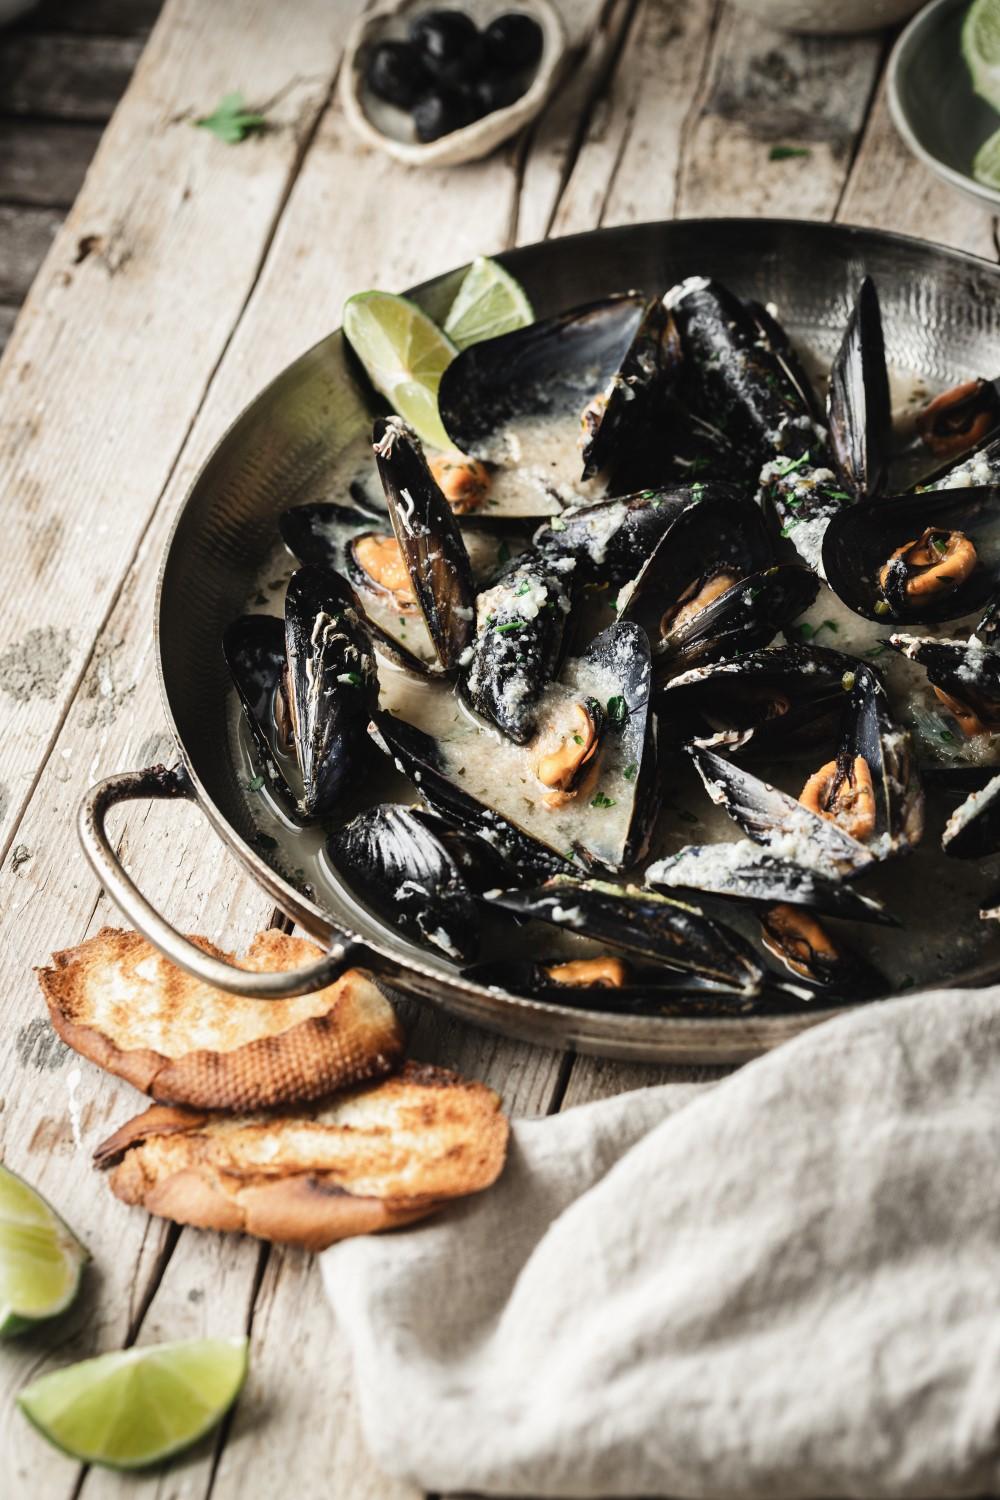 This mussels recipe is the easiest and super delicious! With just a few simple ingredients you get maximum flavors. Wine, garlic, and parsley make the most delicious sauce.